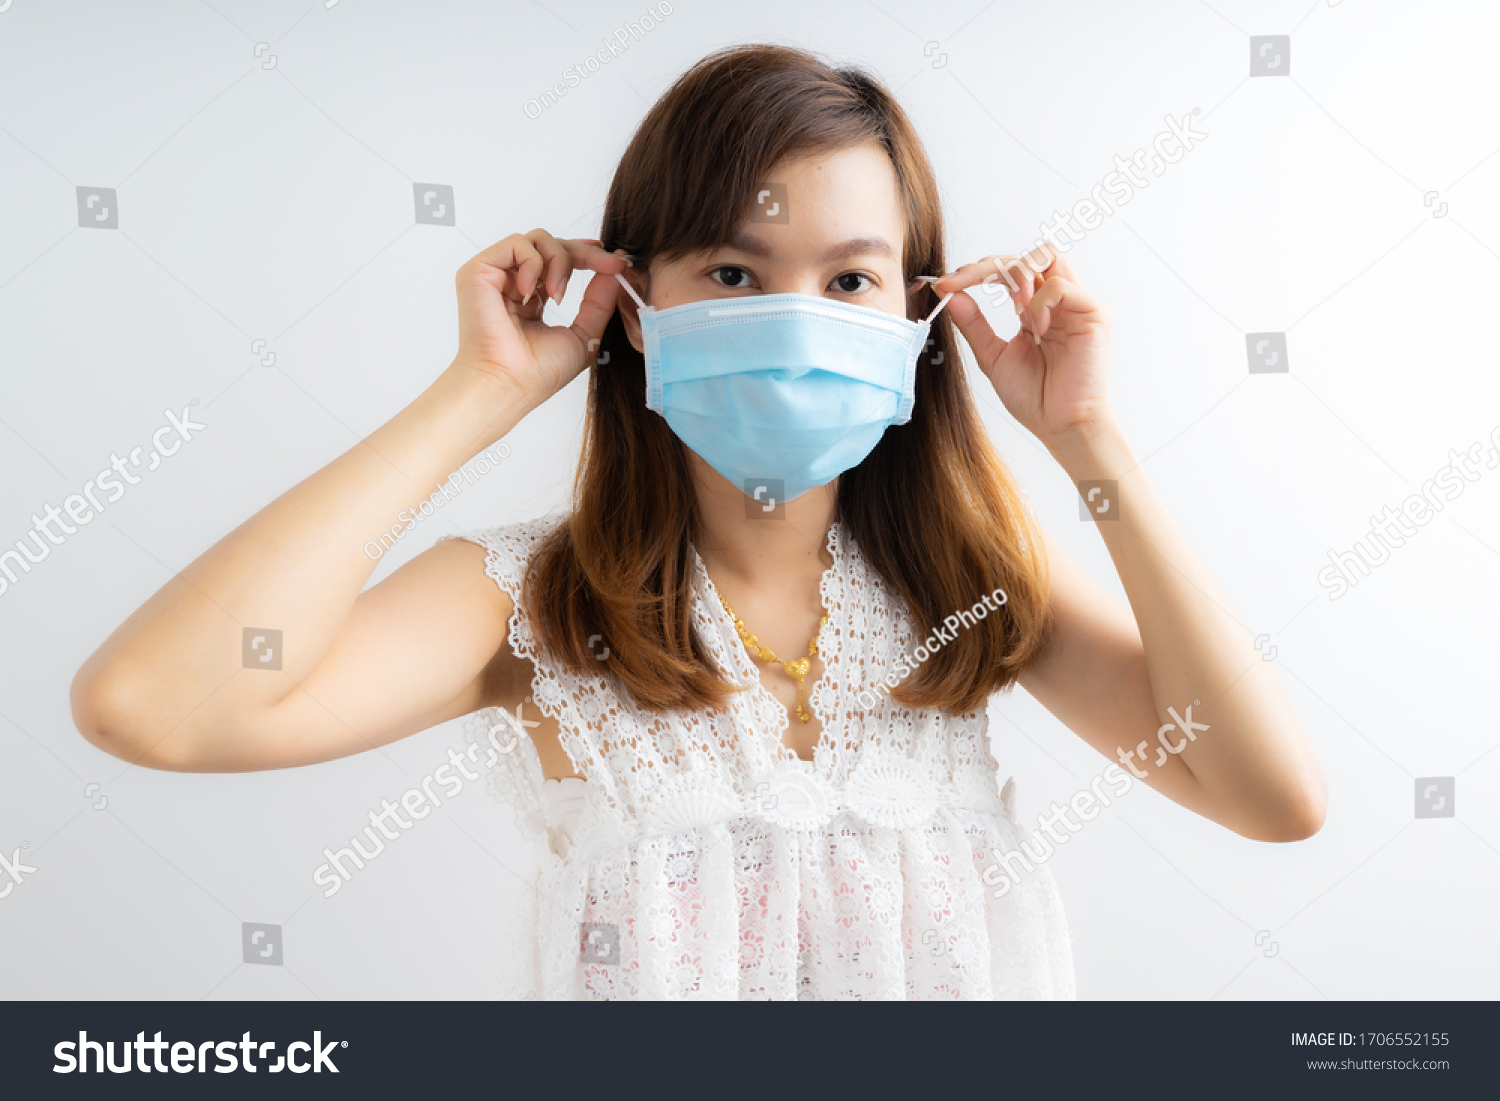 Close up portrait of young woman with medicine health care mask against white white background. CoronaVirus, Covid-19. Asian people #1706552155